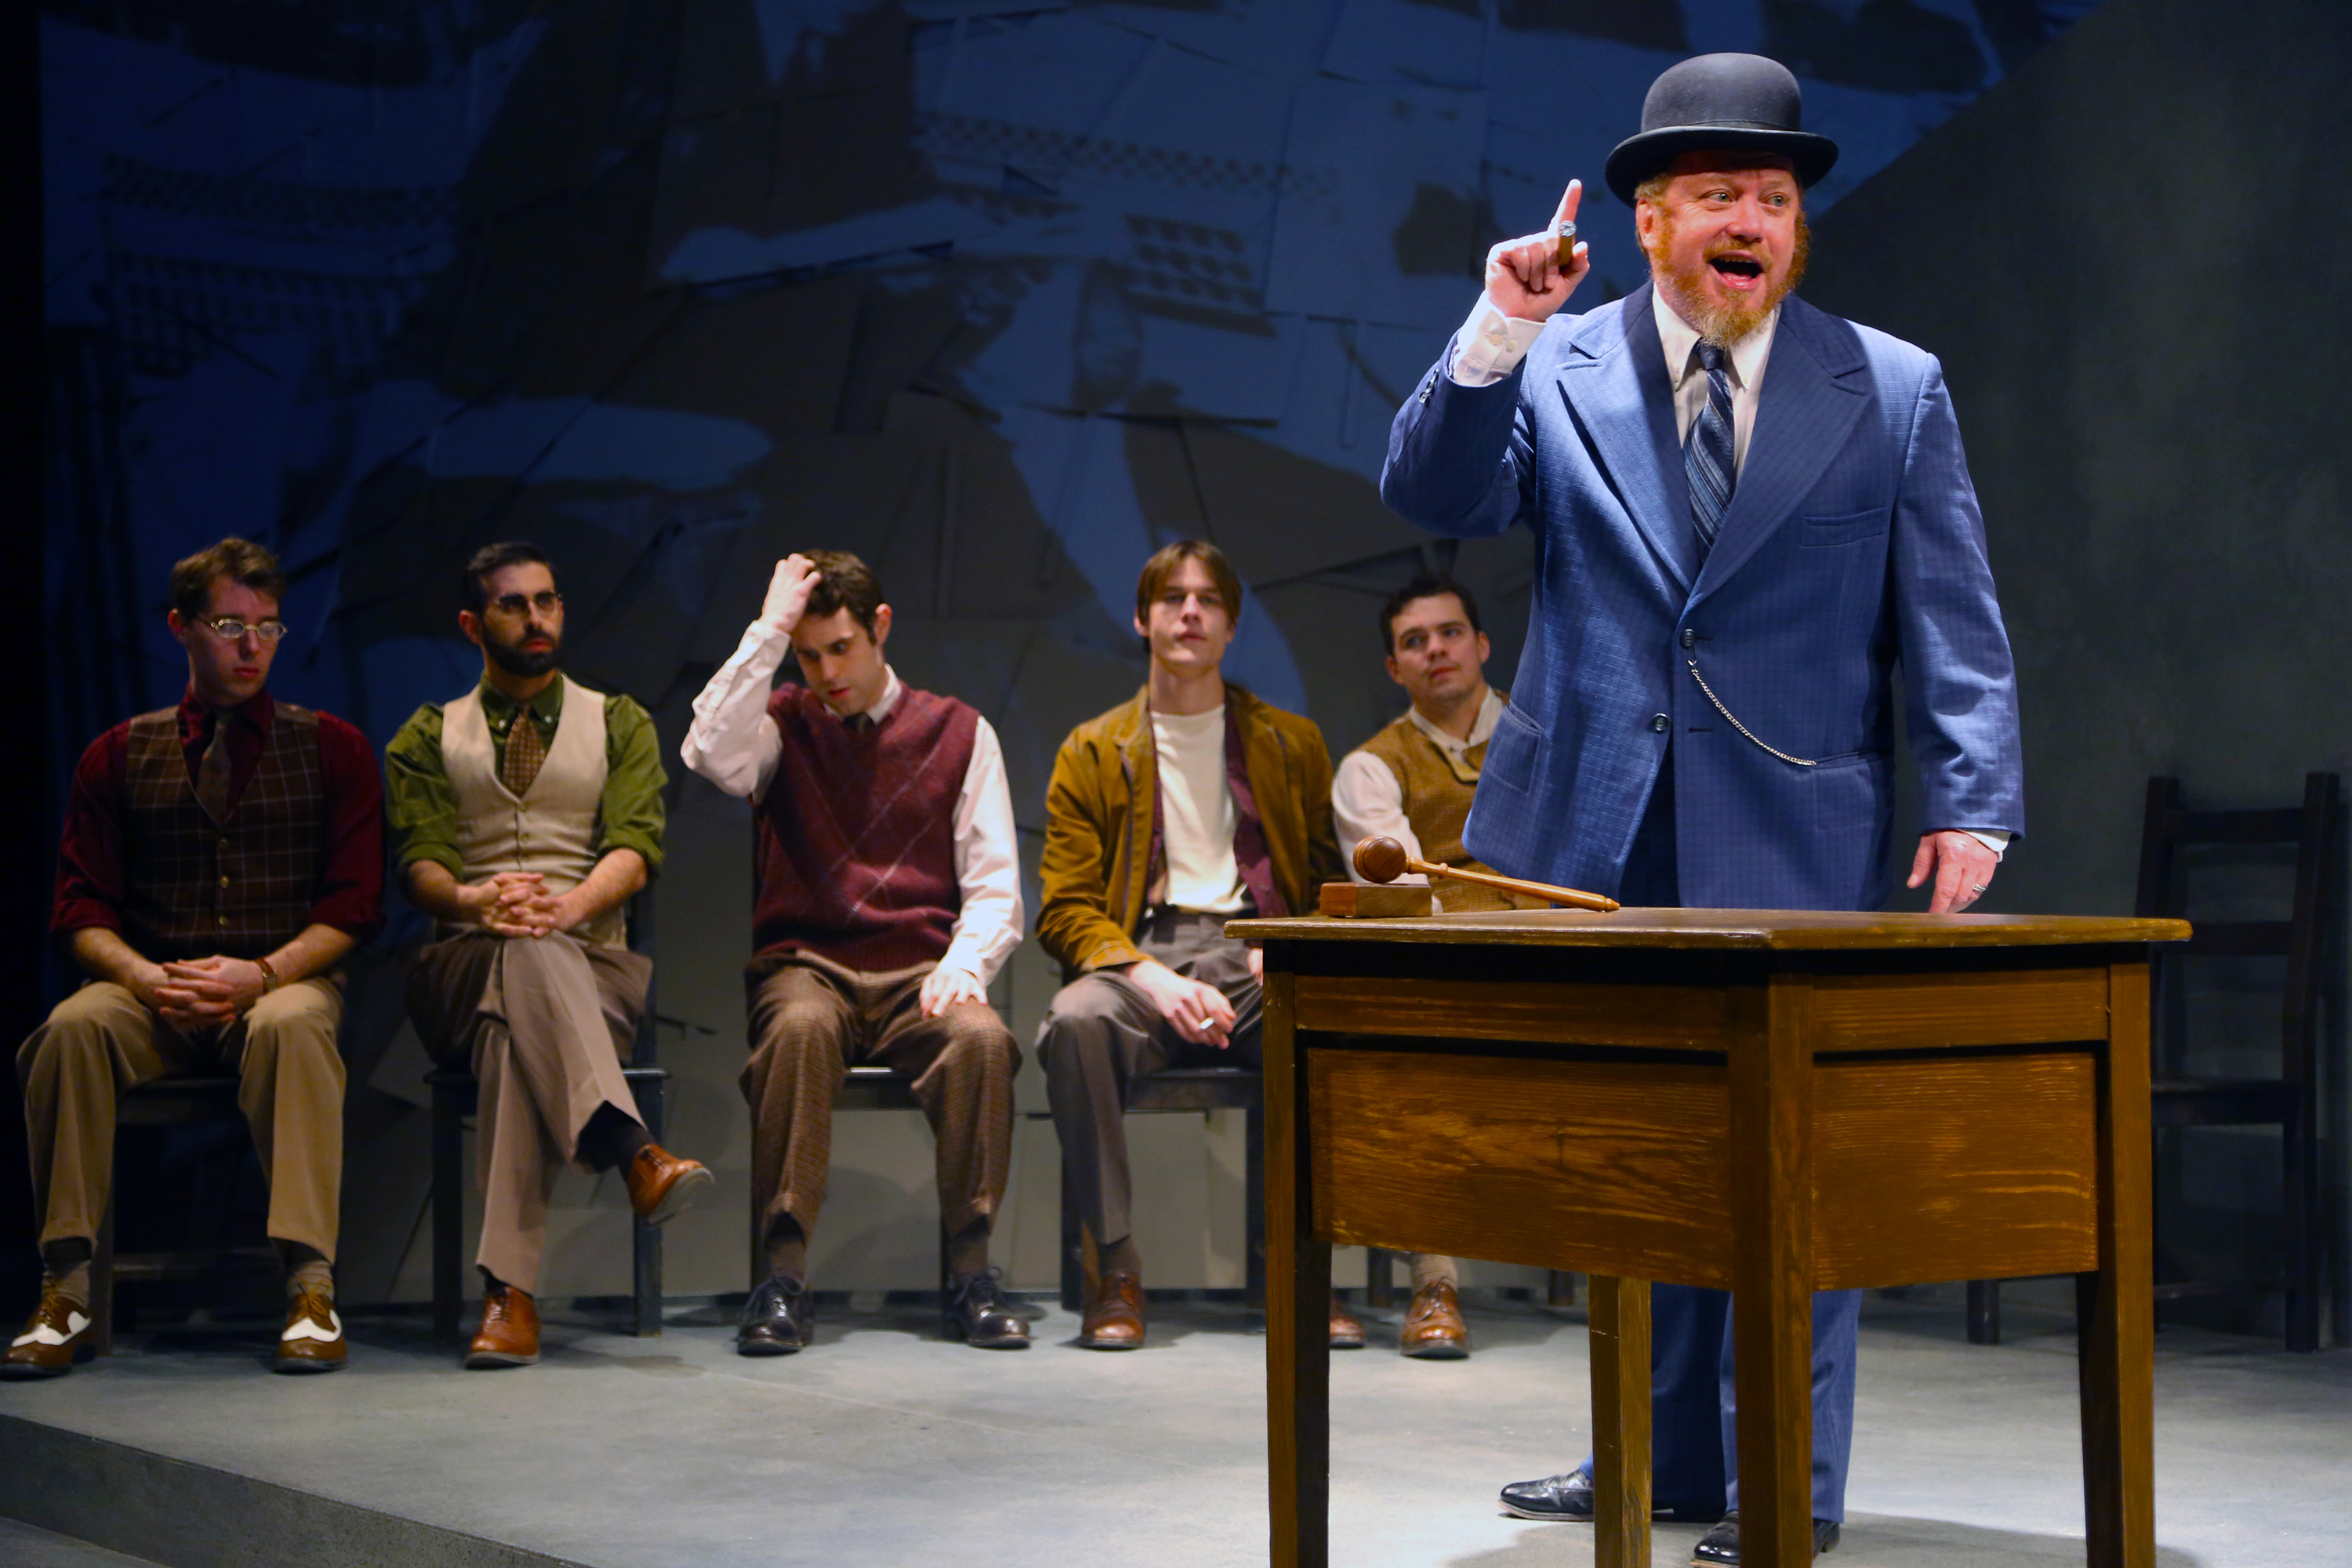 Guest artist Michael Lewis (Harry Fatt) is the union leader in Connecticut Repertory Theatre’s production of 'Waiting for Lefty' by Clifford Odets, onstage through March 5 at Nafe Katter Theatre. (Gerry Goodstein for UConn)